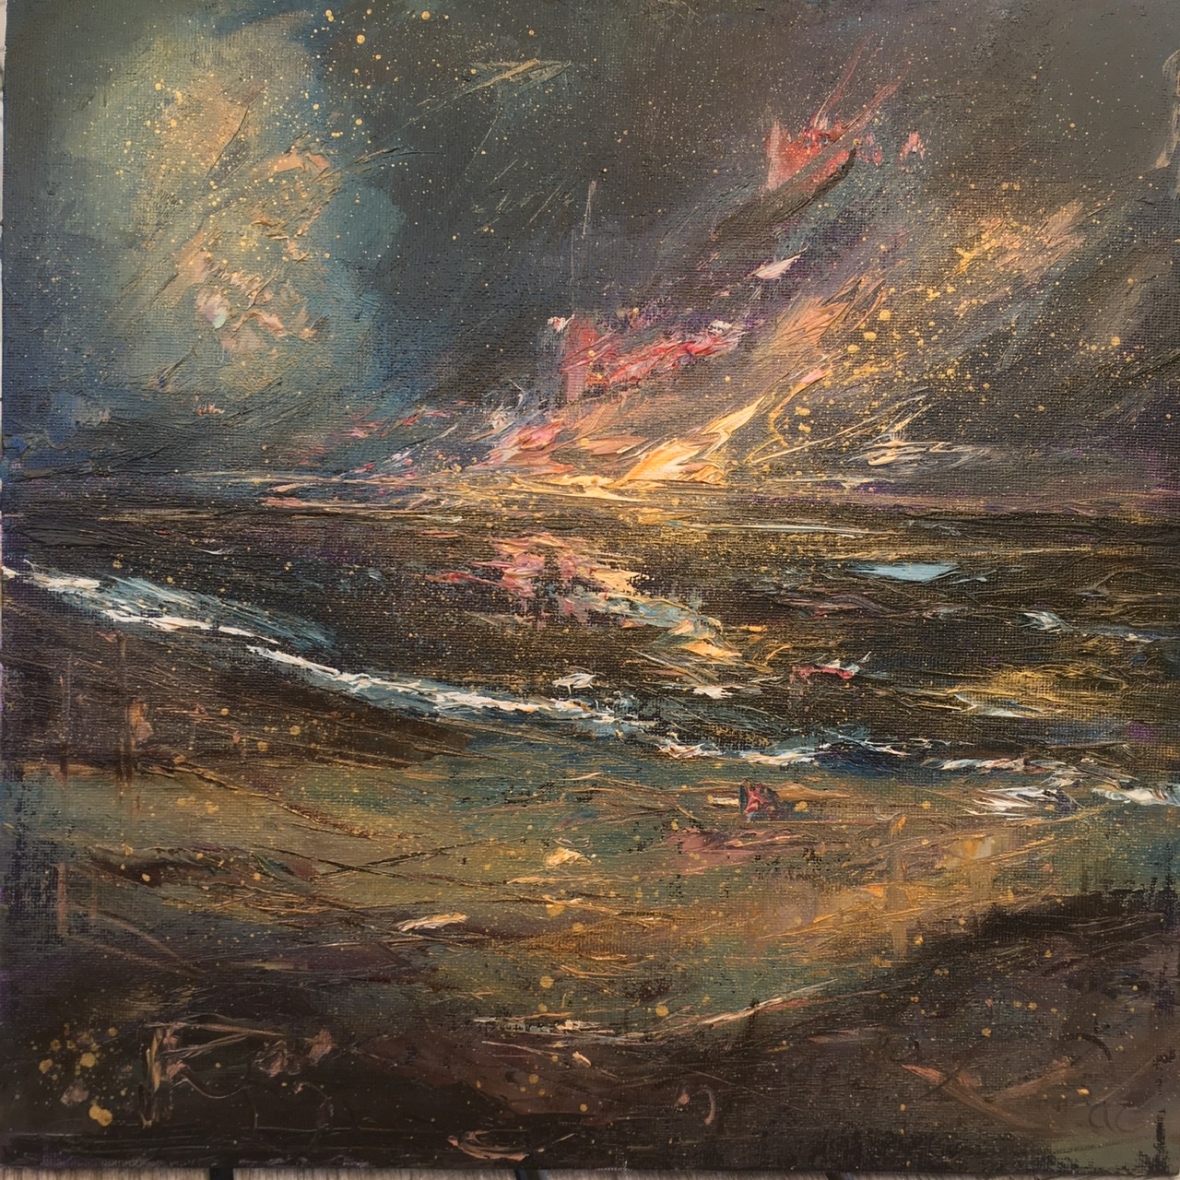 Dusk falling, oil painting by Anna Cumming